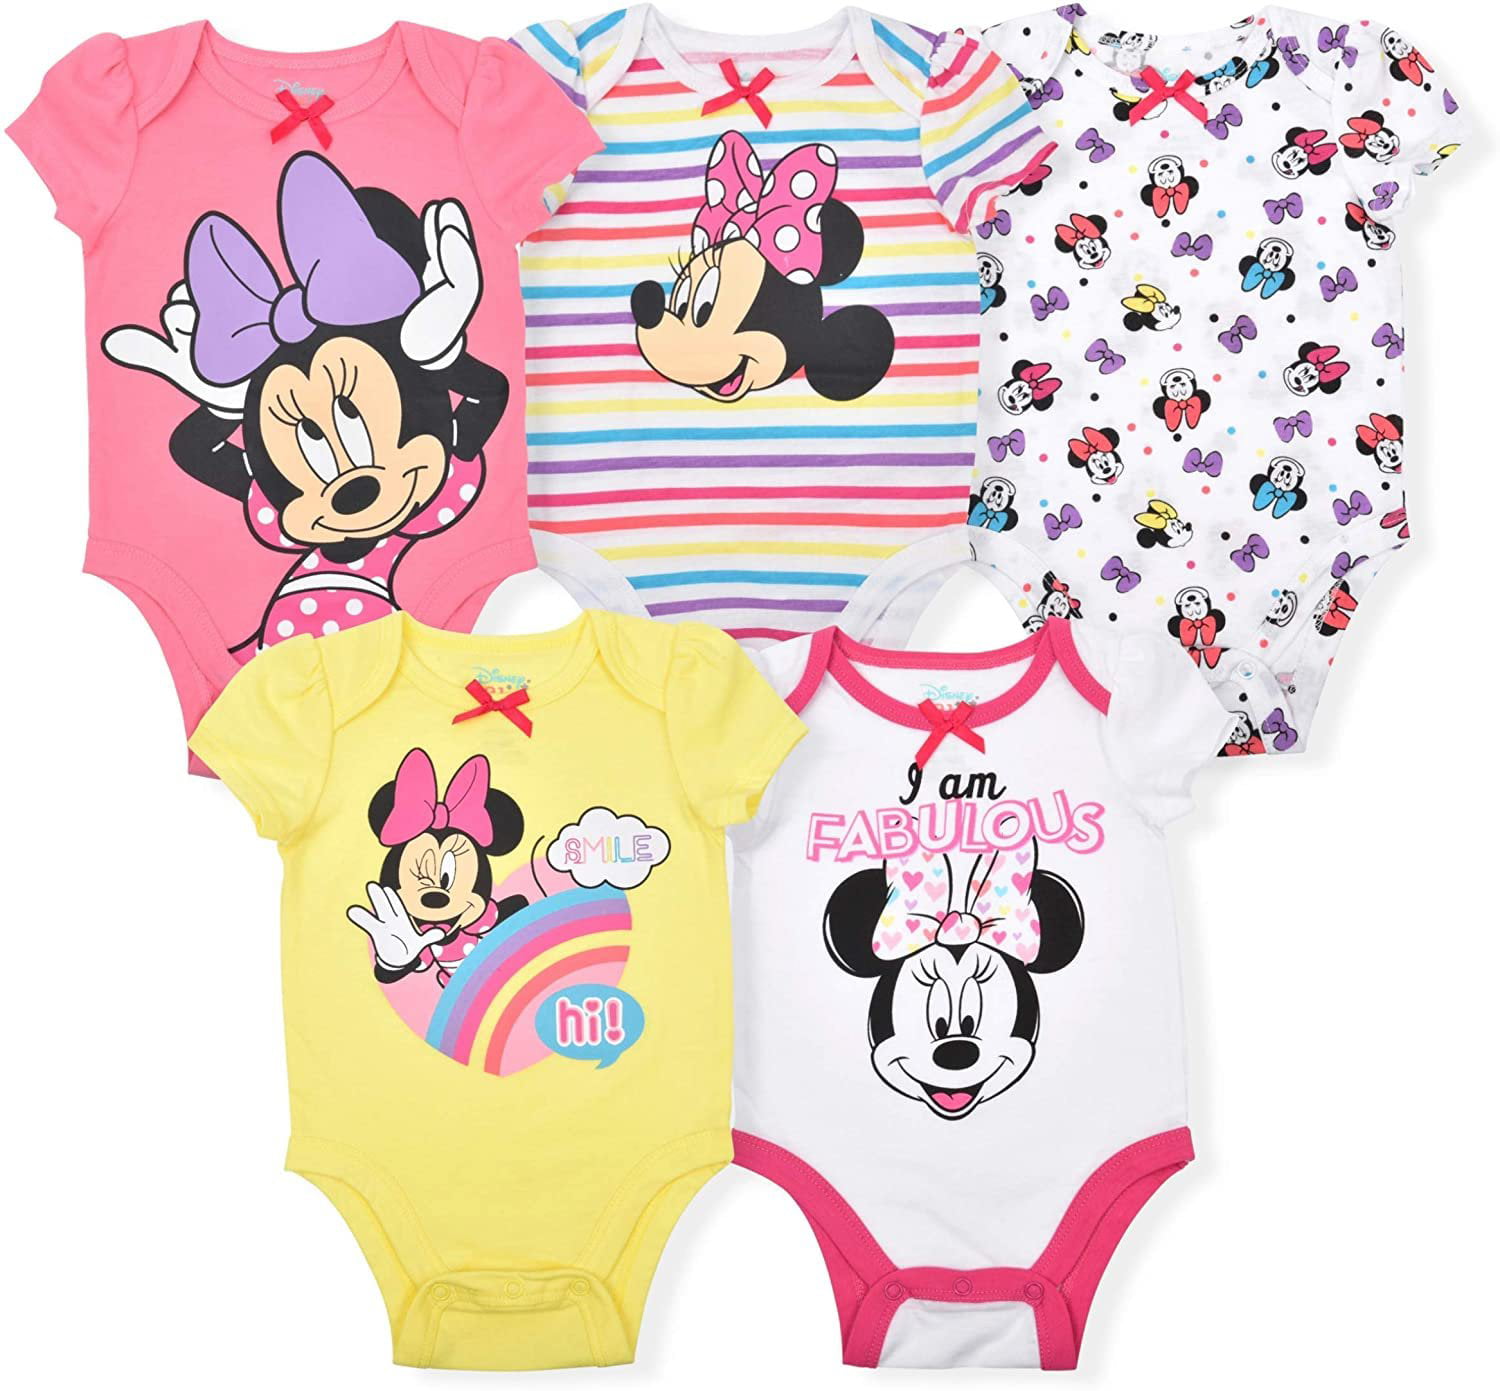 Disney Authentic Minnie Mouse Halloween Baby Bodysuit Size 3 6 9 12 18 24 Months